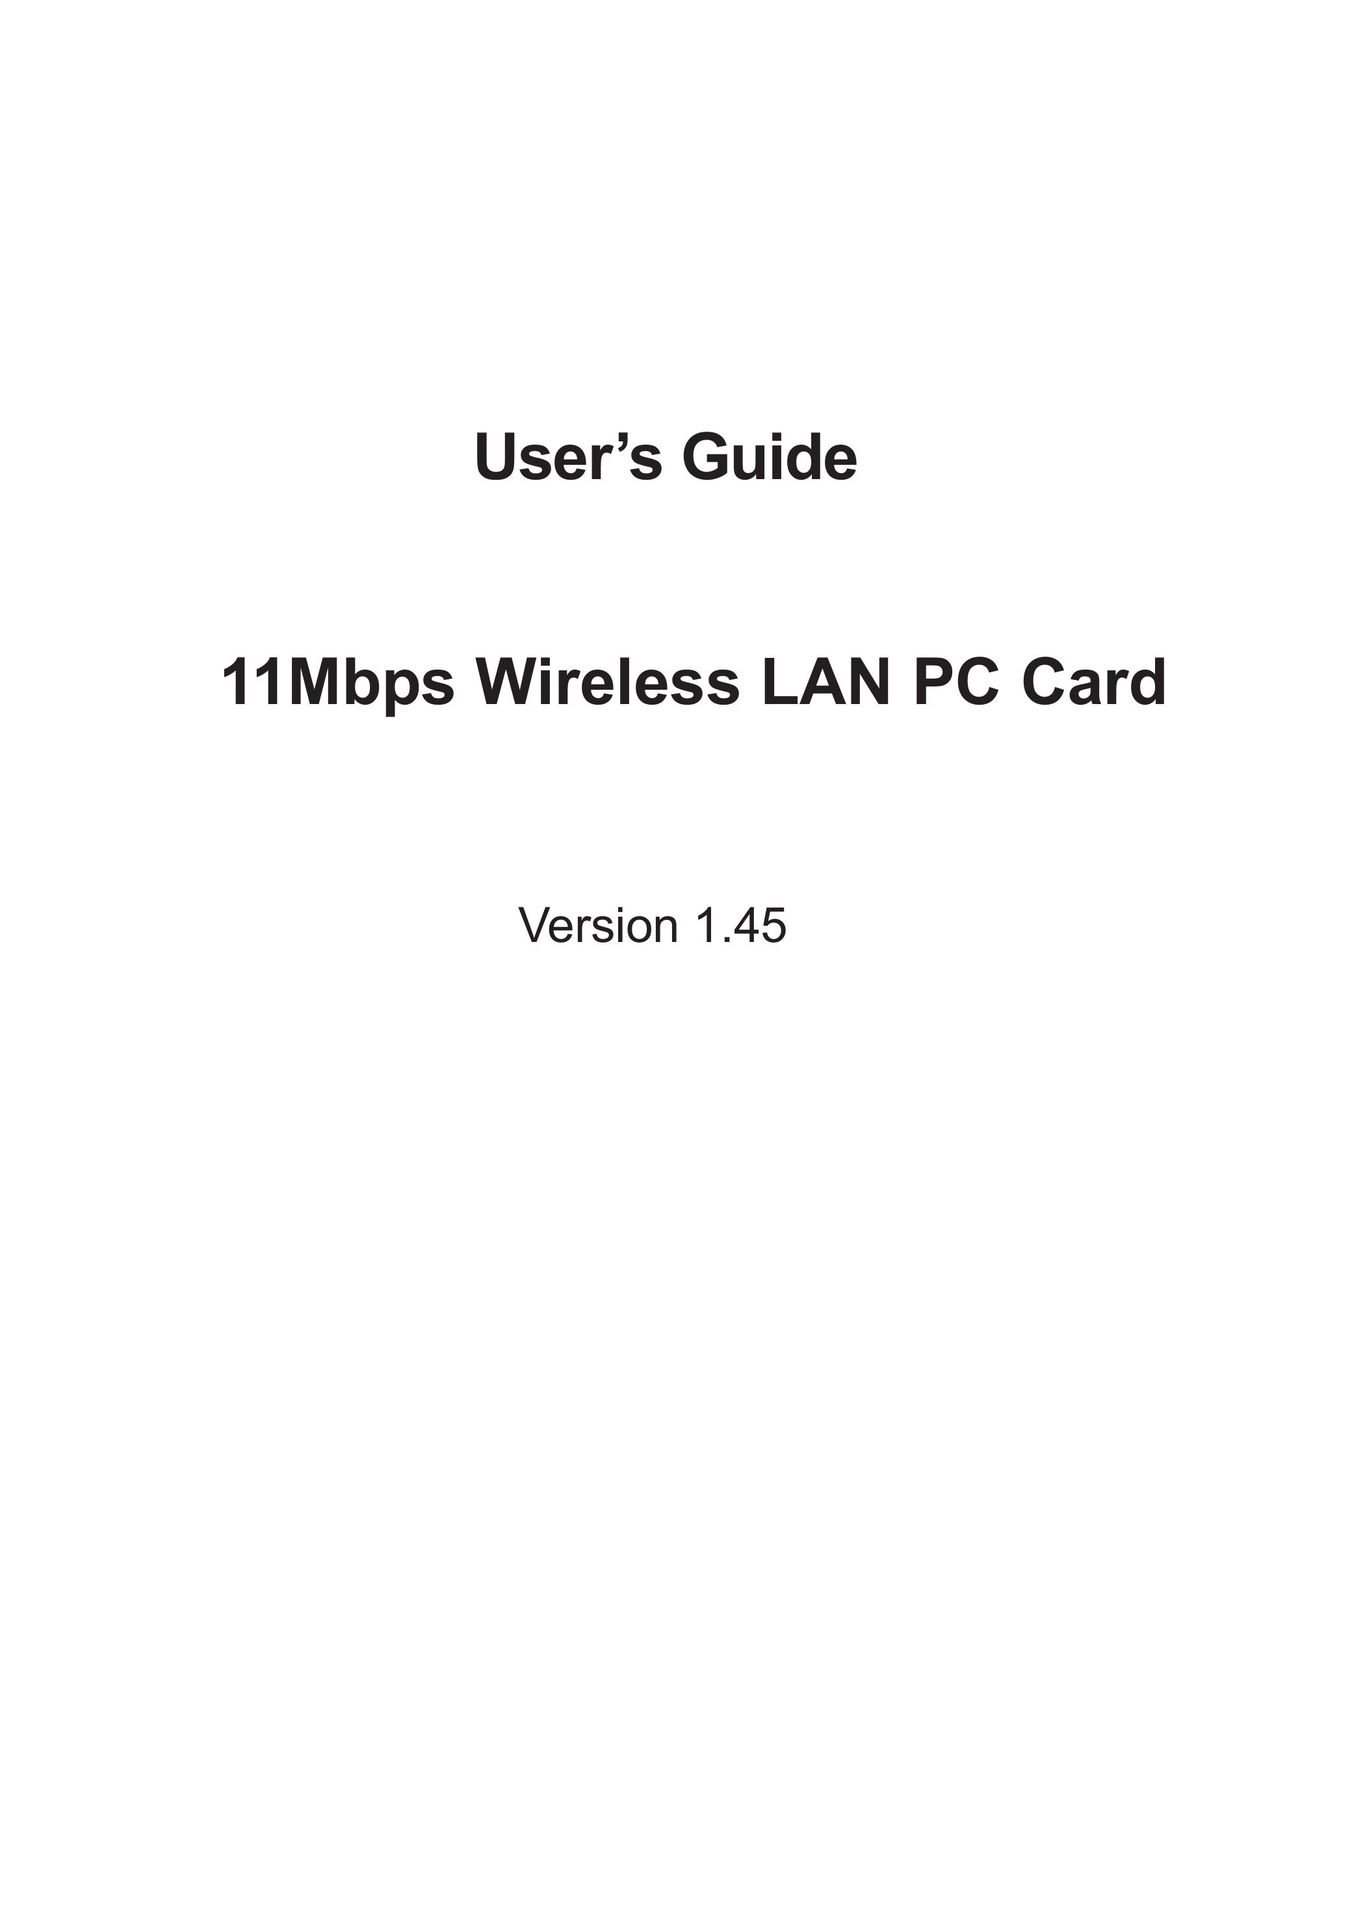 Boca Research 11Mbps Network Card User Manual